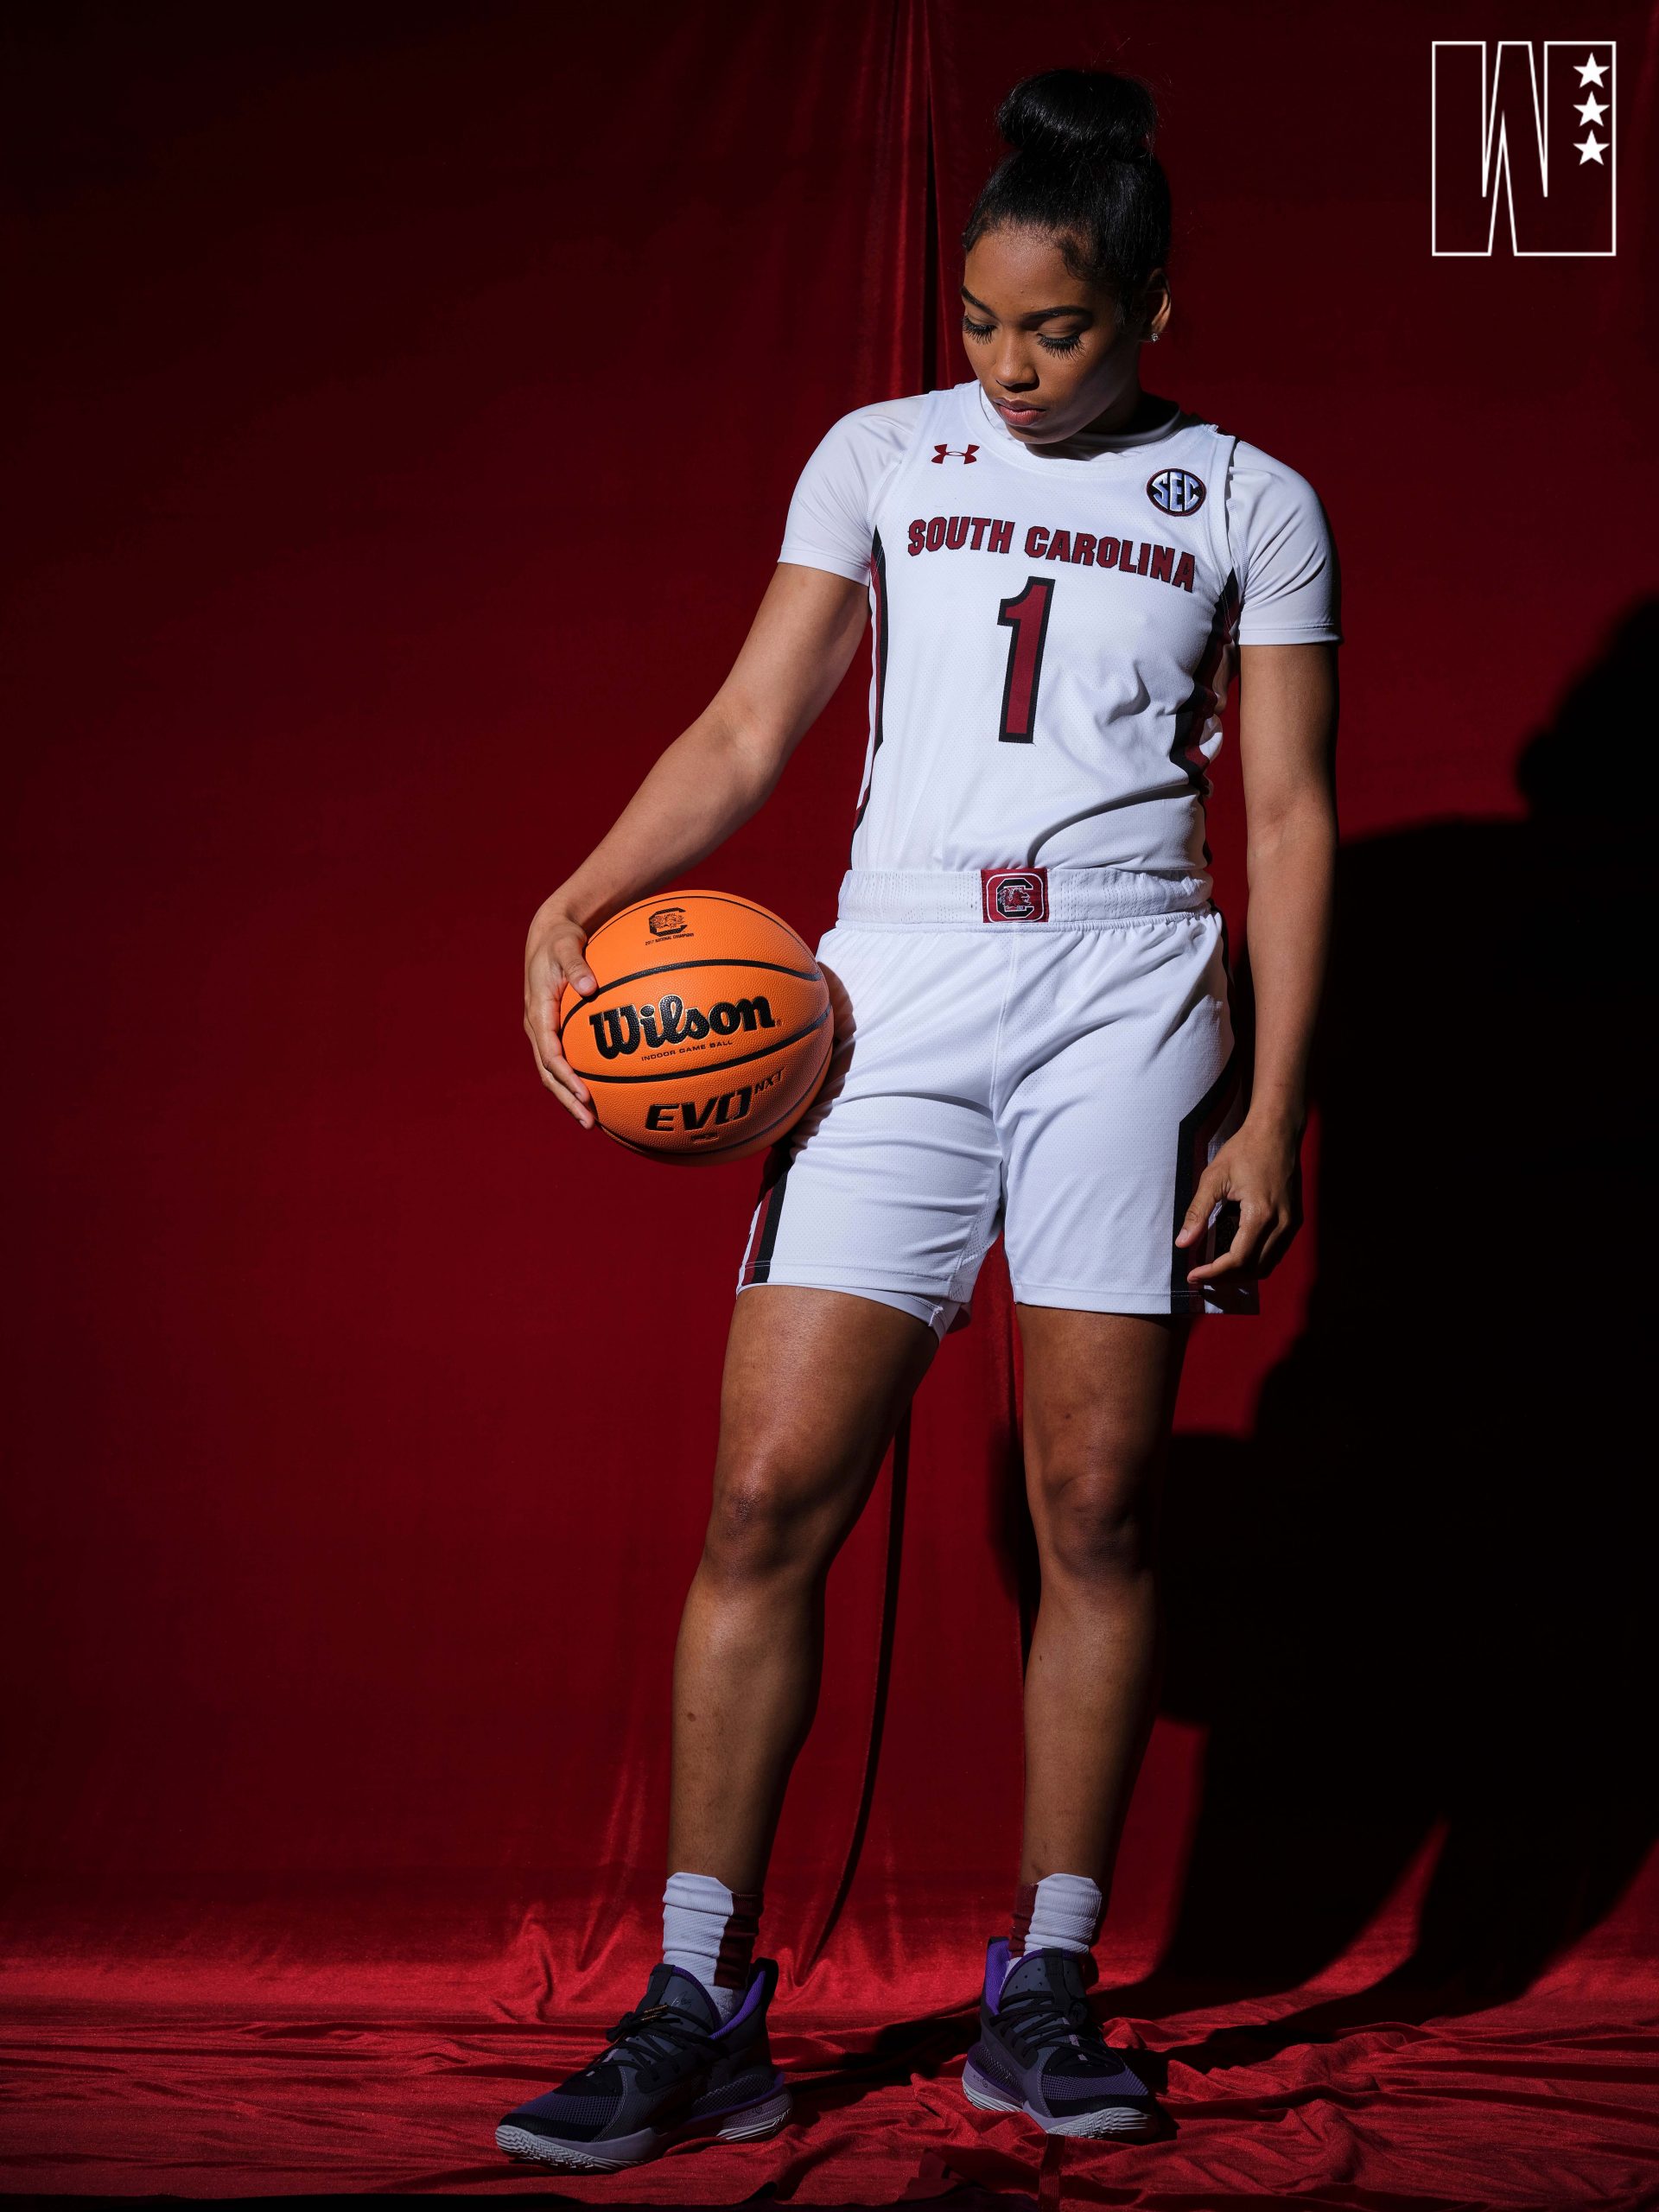 Dawn Staley and the Gamecocks Are College Basketball's Authors of Evolution